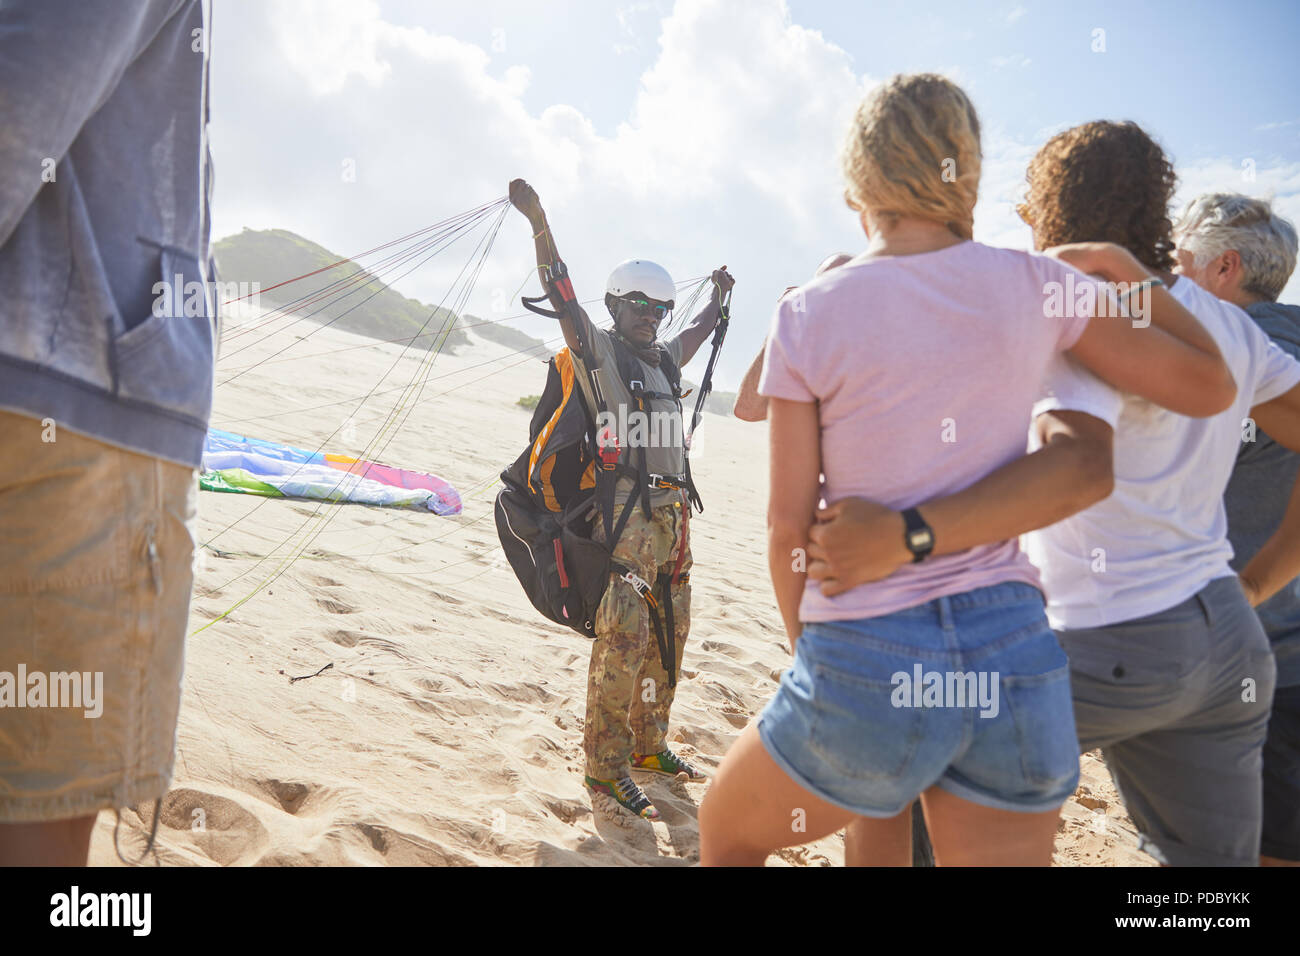 Students watching male paragliding instructor with equipment on sunny beach Stock Photo